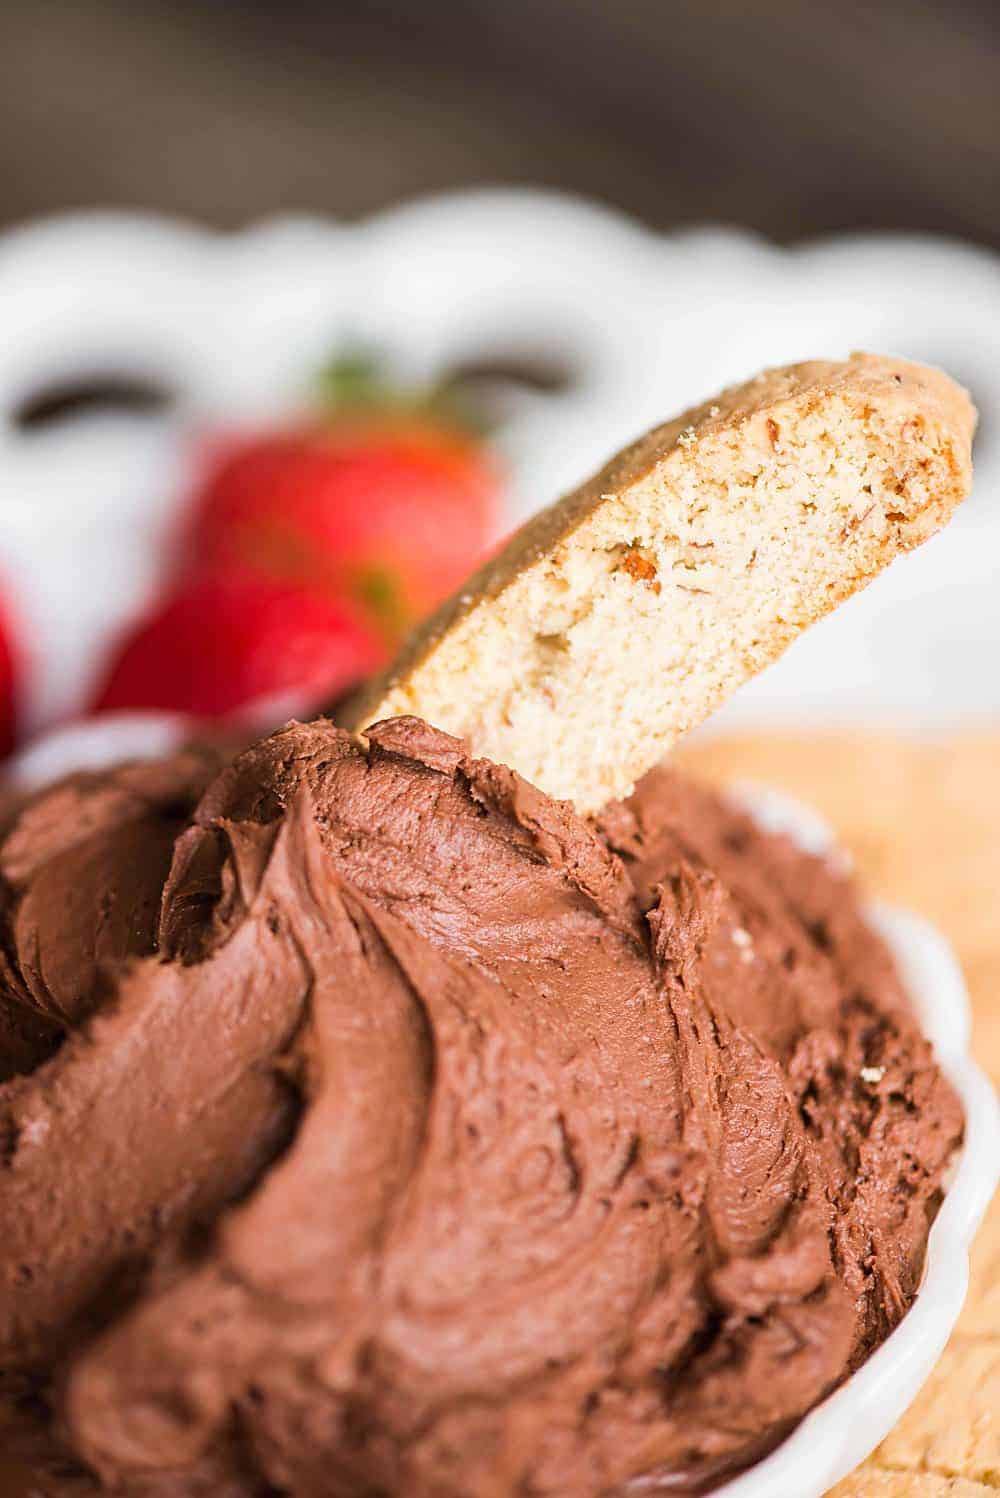 Fruit dip recipe with chocolate and biscotti